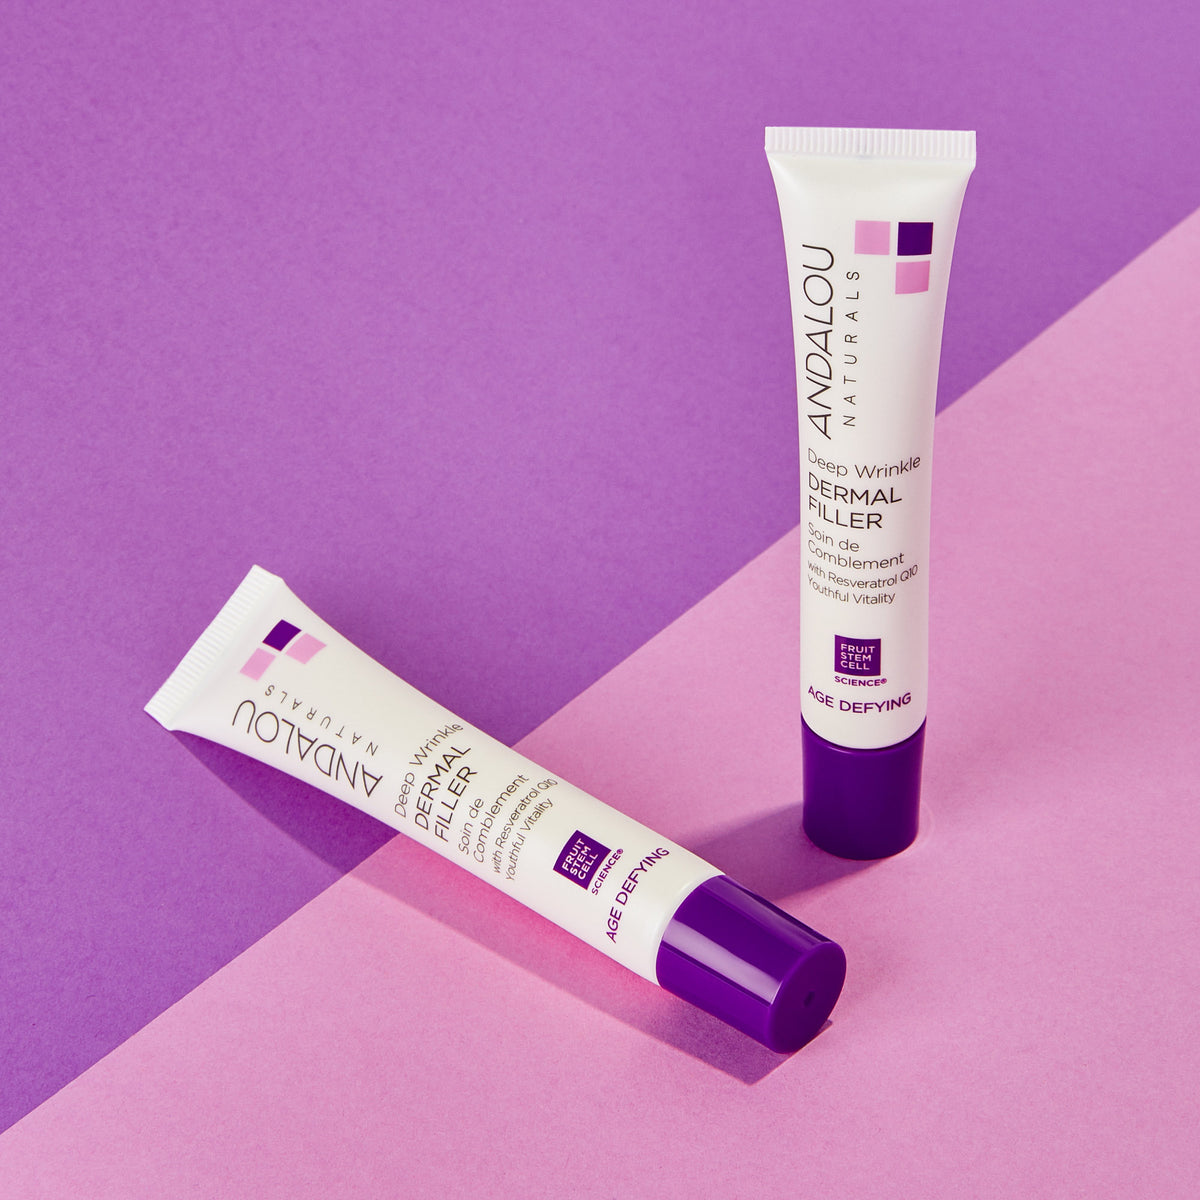 Two tubes of Age-Defying Deep Wrinkle Dermal Filler from Andalou Naturals on a pink and purple background.